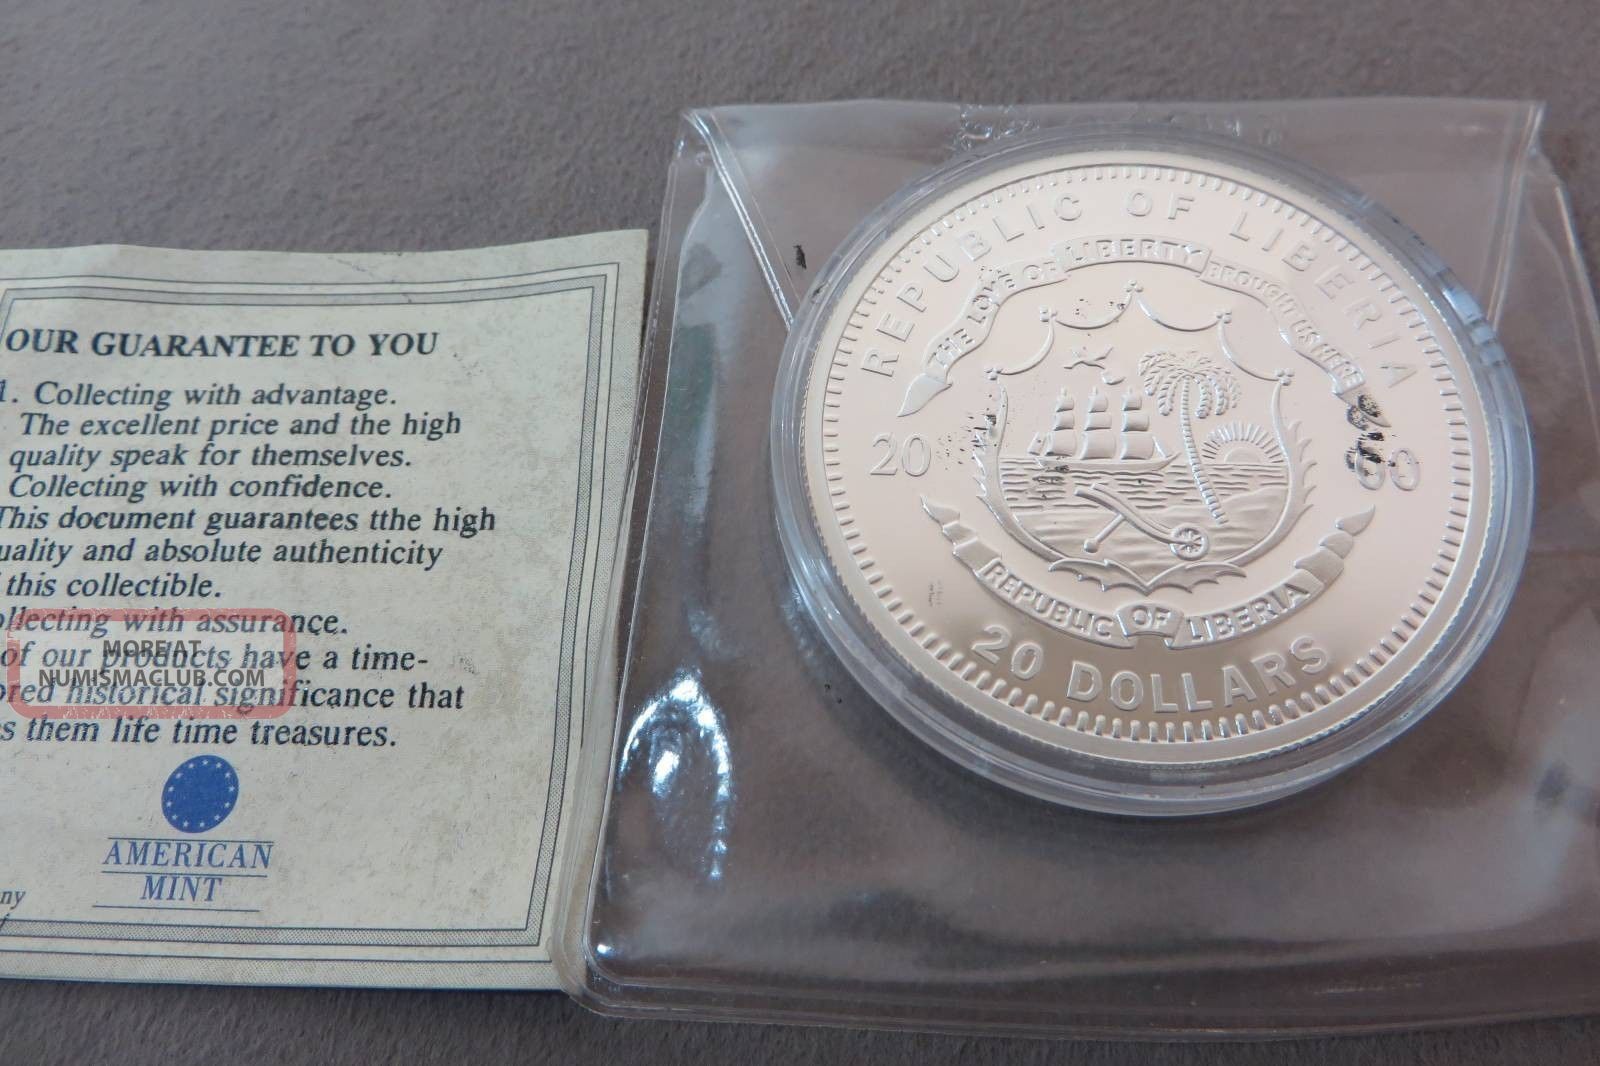 declaration of independence coin republic of liberia